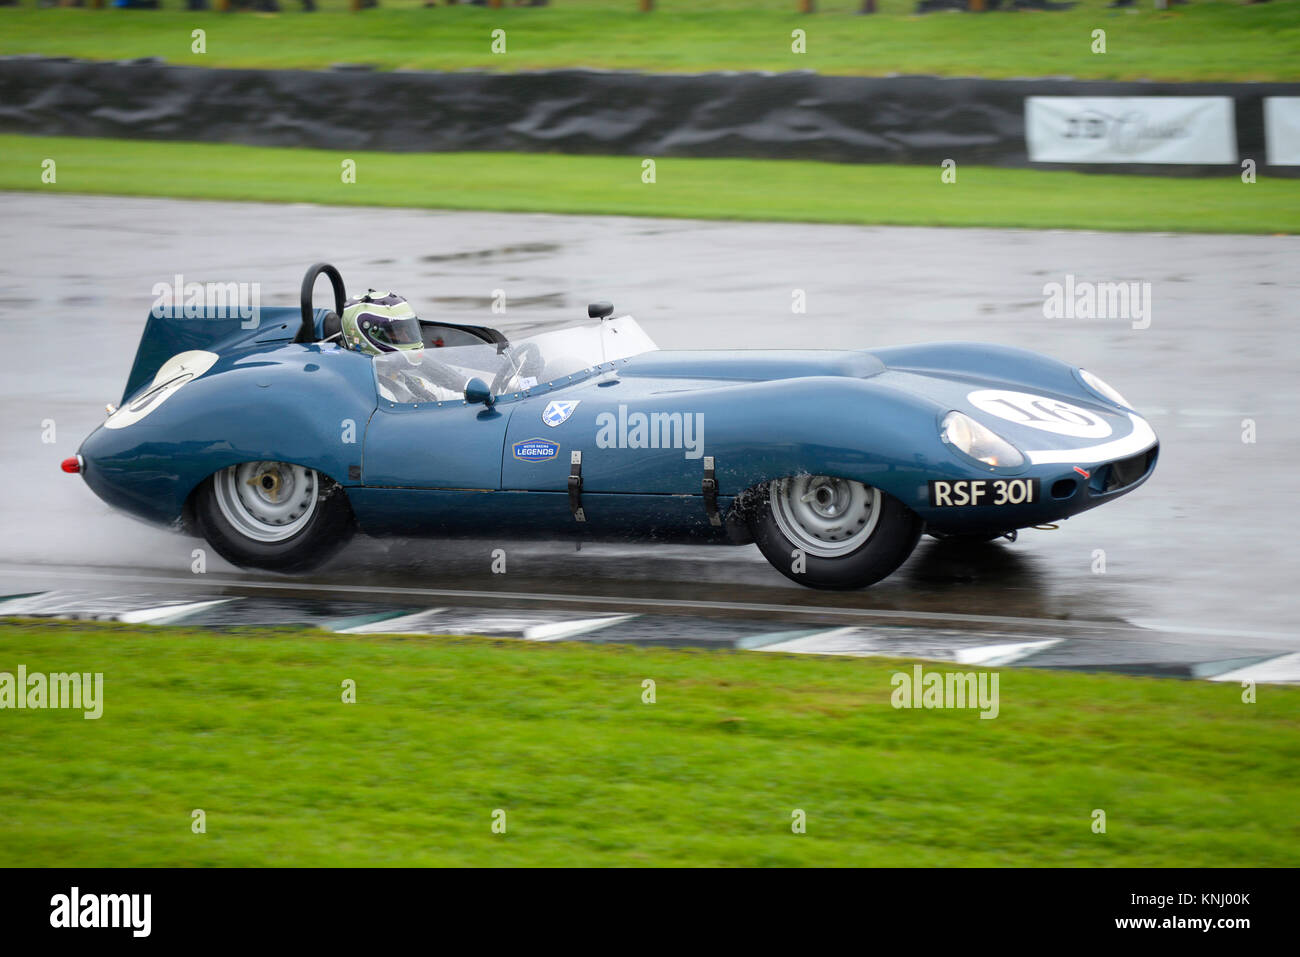 1959 Tojeiro Jaguar owned by Jeremy Cottingham driven by James Cottingham racing in the Sussex Trophy at Goodwood Revival 2017 Stock Photo